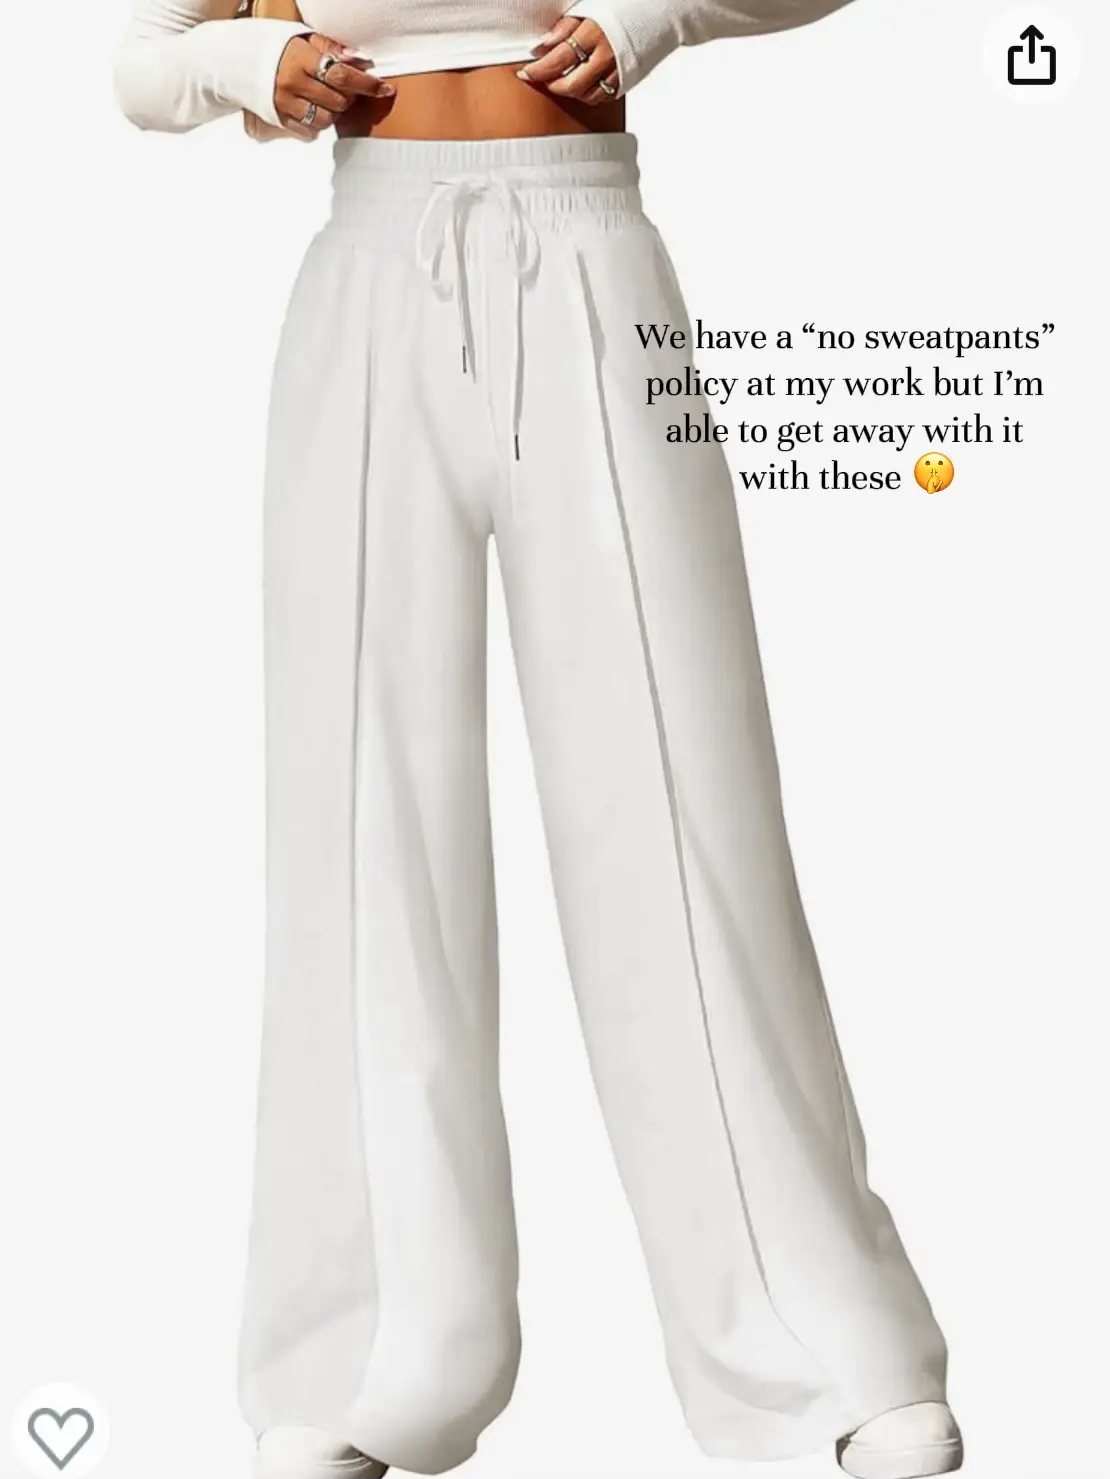 Express  Super High Waisted Pintuck Flare Trouser Pant in Bubble